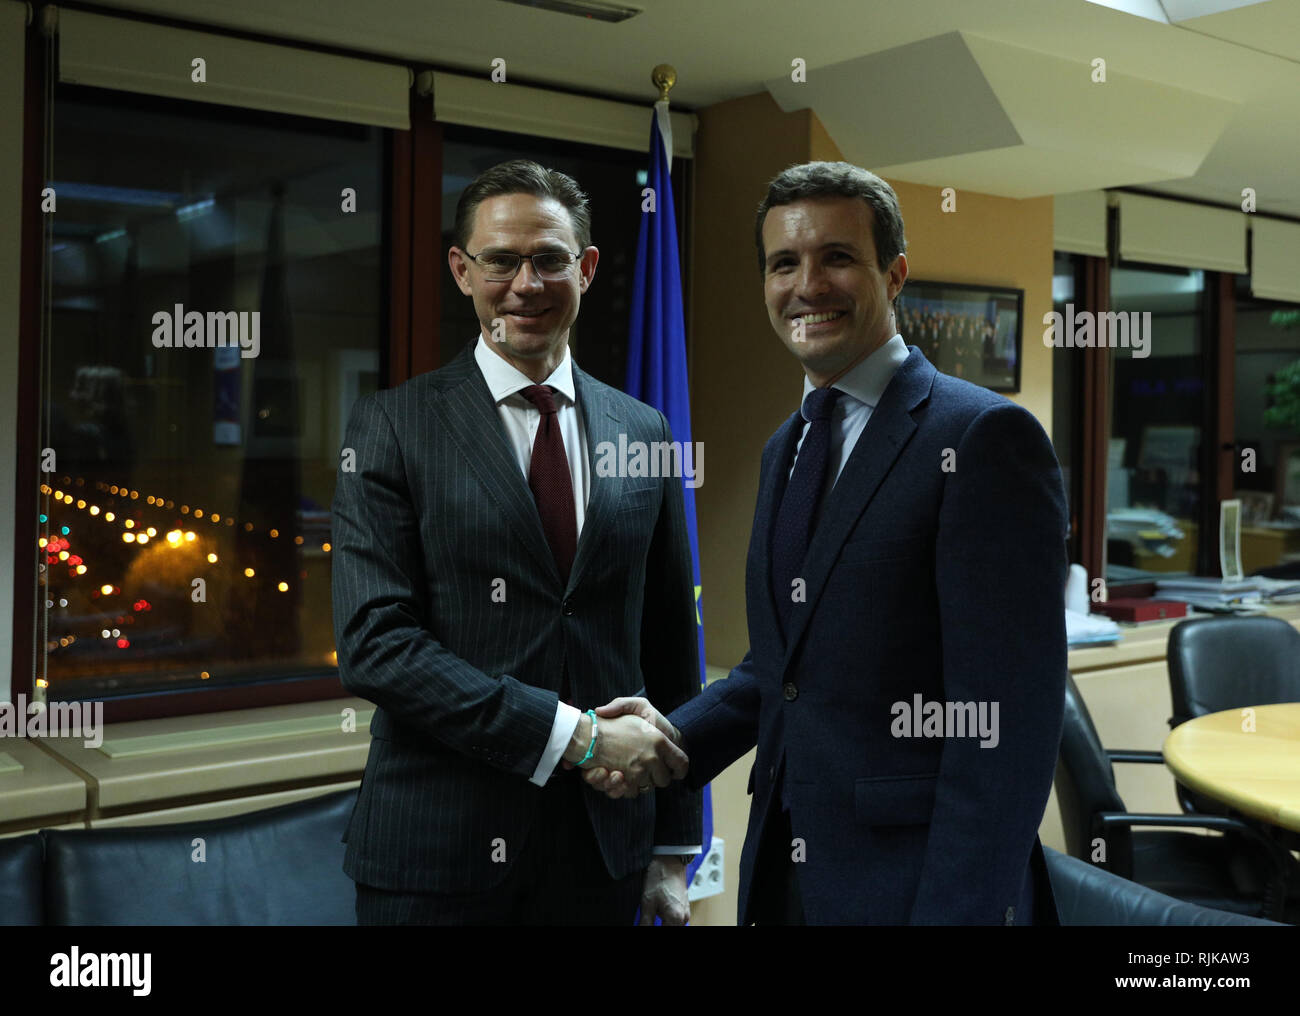 Madrid, Spain. 6th Feb 2019. The President of the Popular Party, Pablo Casado(R), meets with the Vice President of the European Commission, Jyrki Katainen(L) at the headquarters of the Representation of the European Commission in Spain. Credit: Jesús Hellin/Alamy Live News Stock Photo